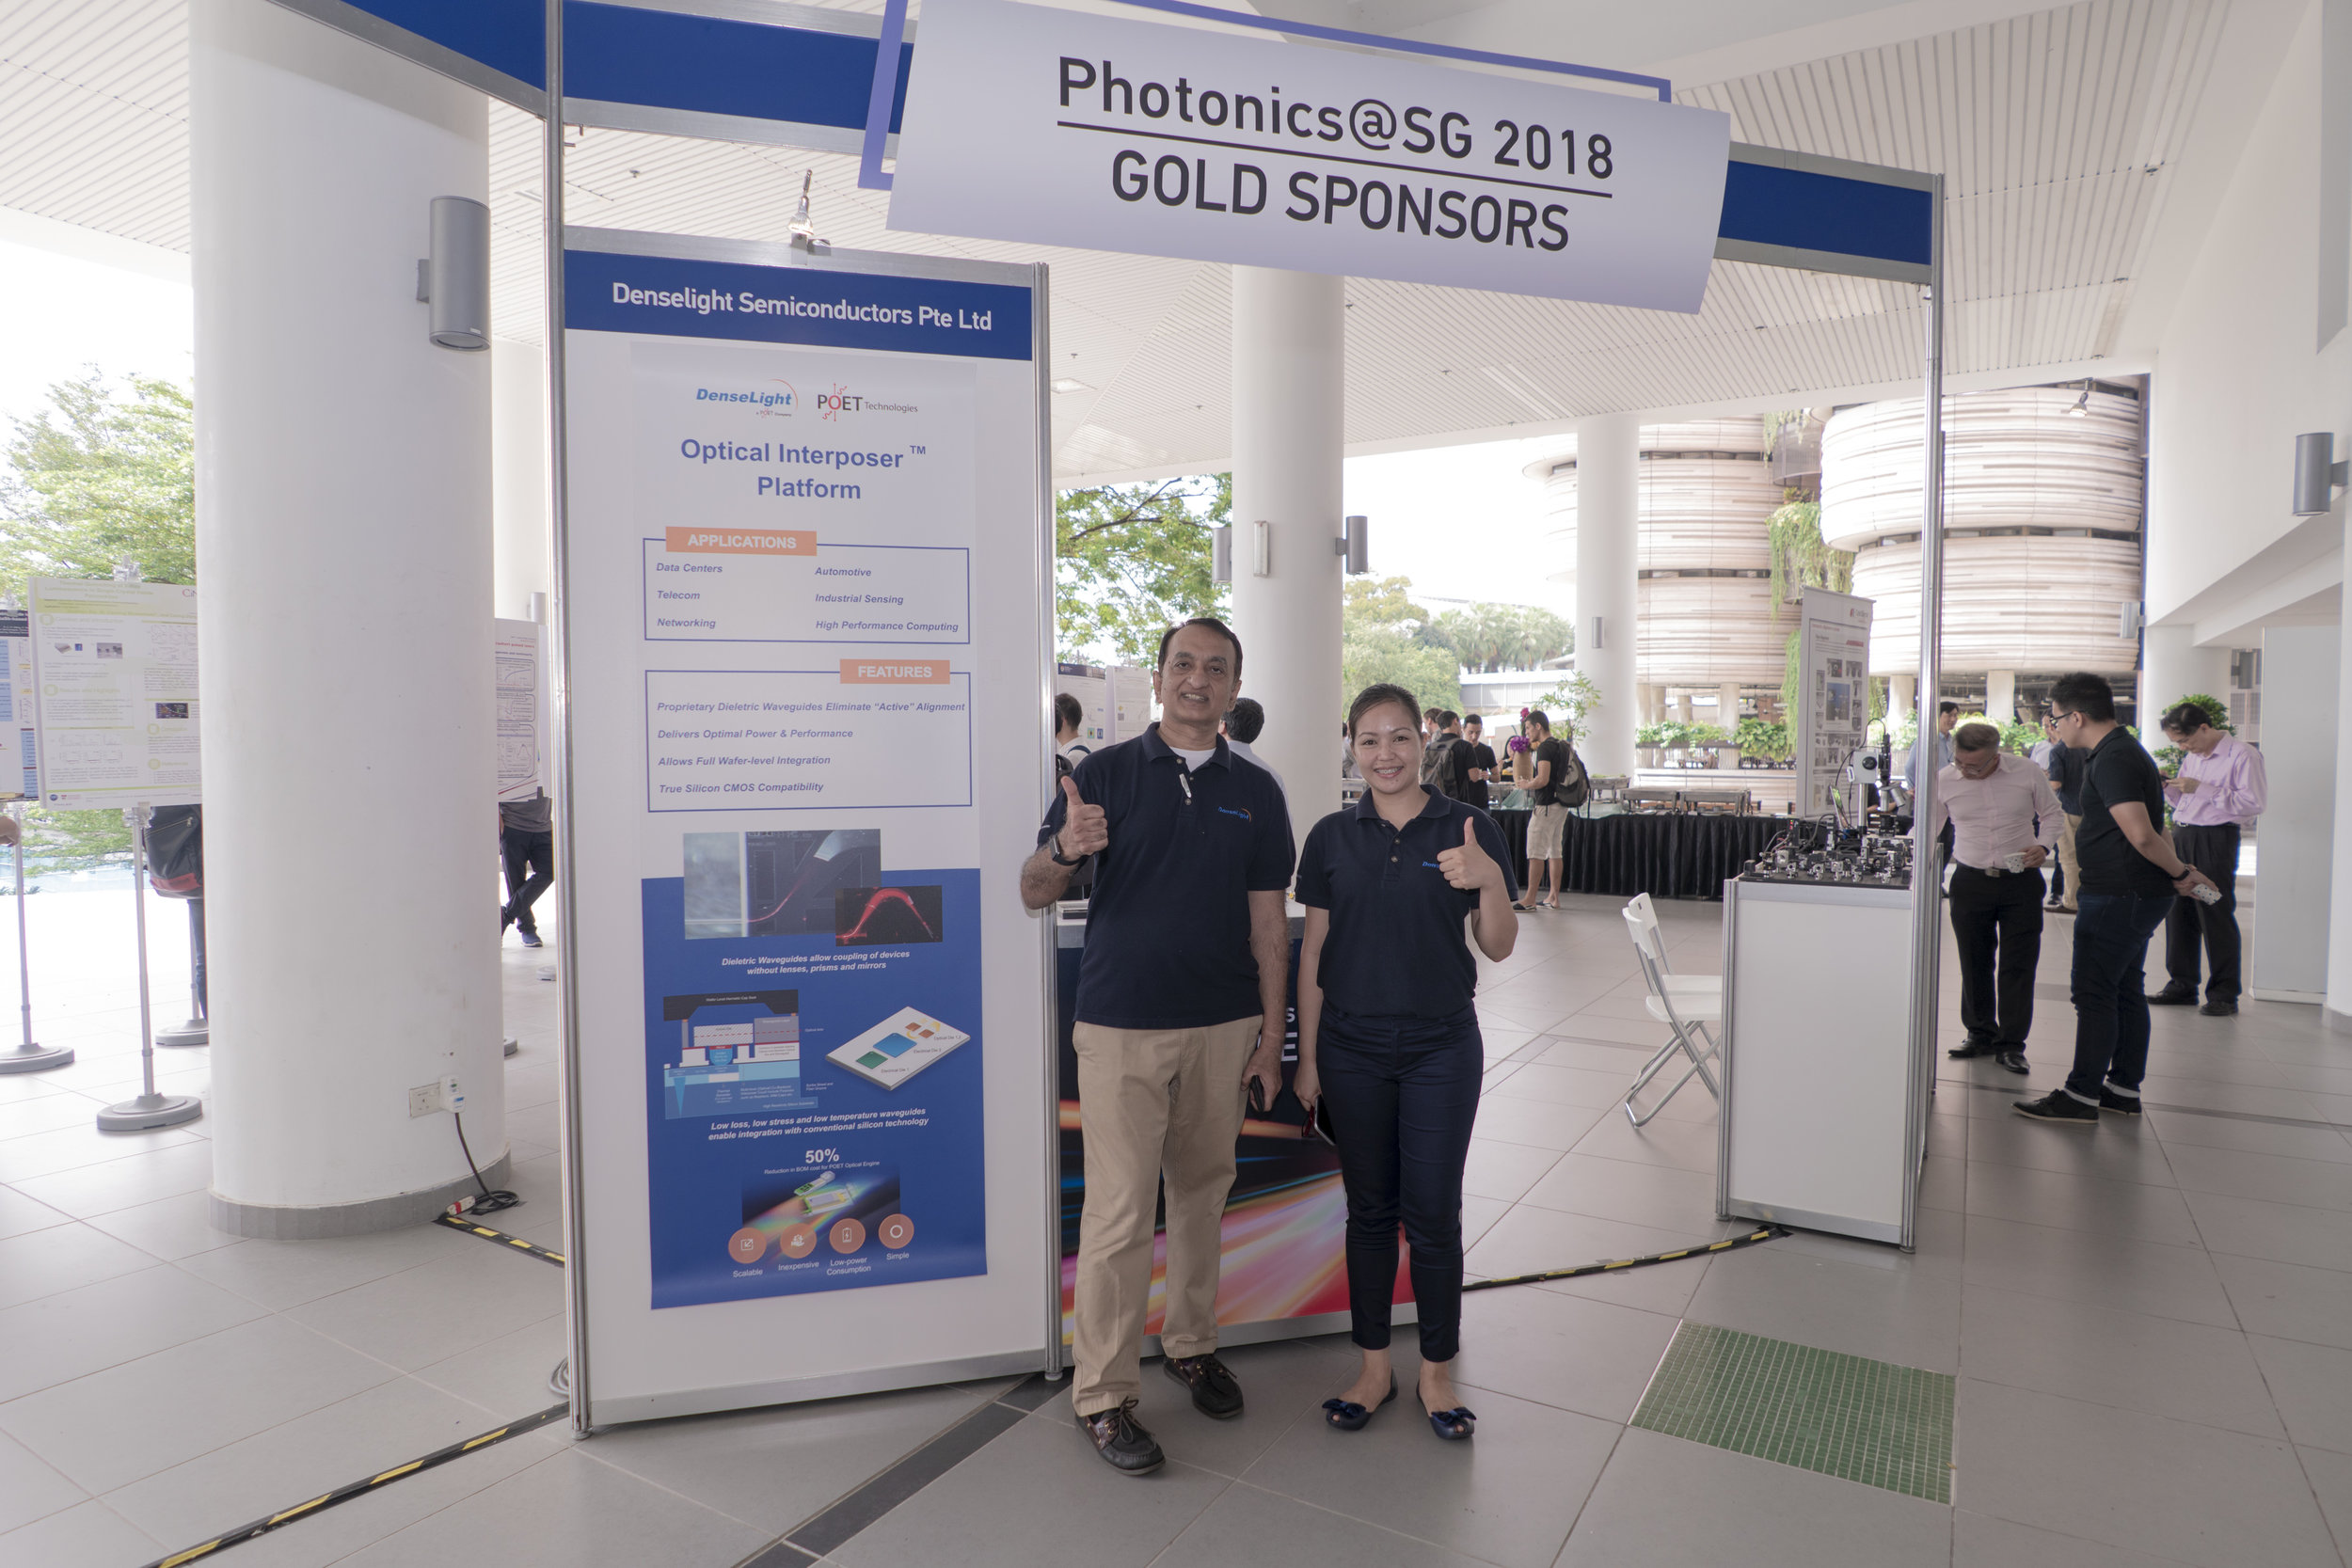 TPI Photonics SG 2018 Conference n Exhibition 0229rc.jpg